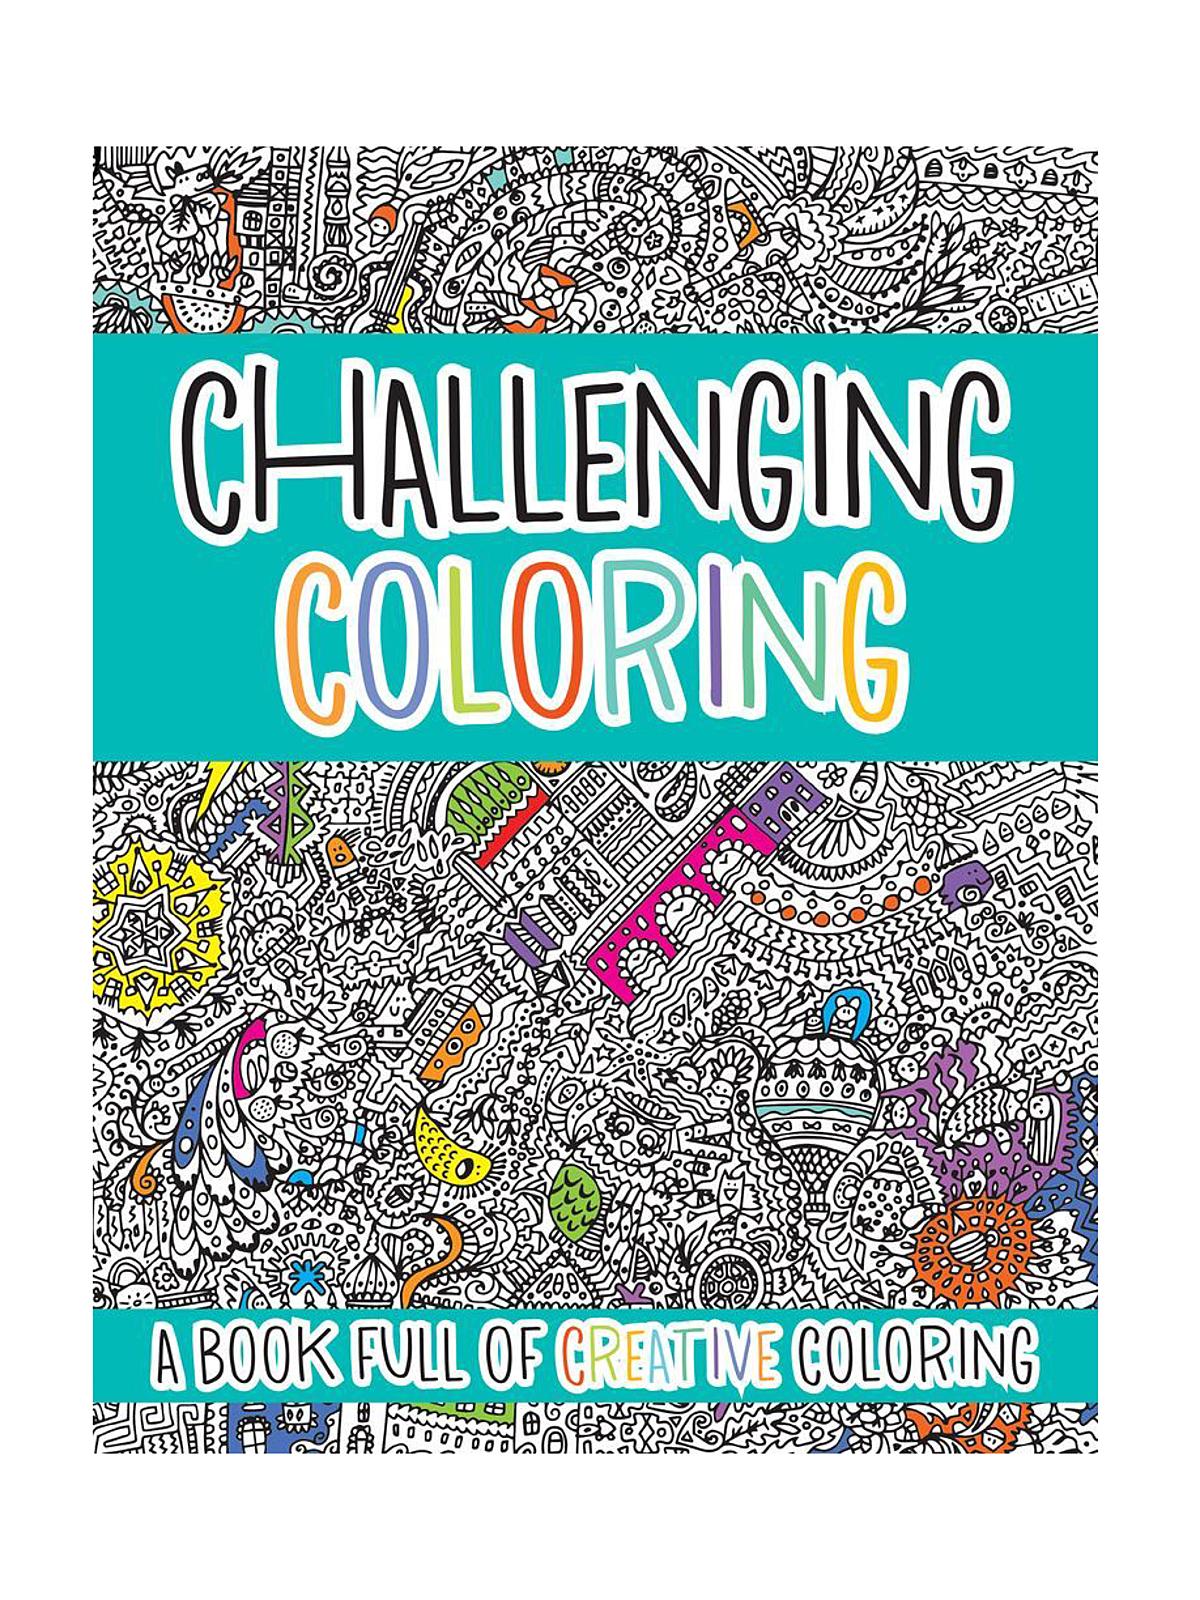 Challenging Coloring Each